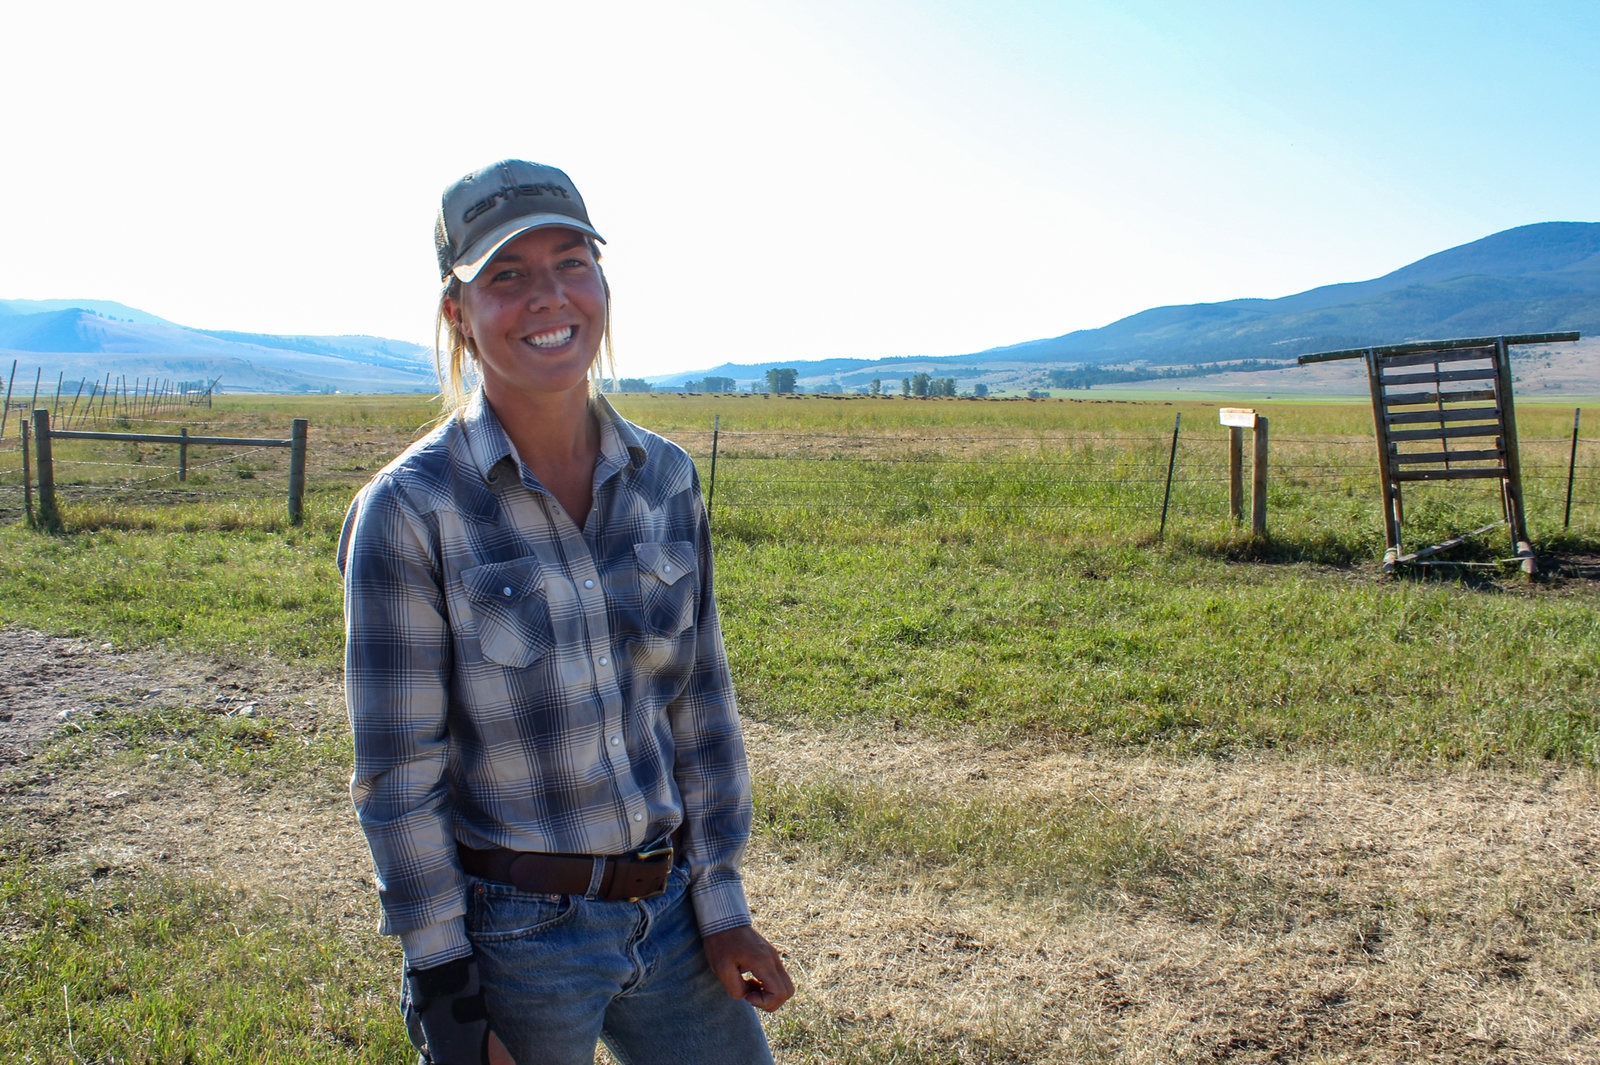 Kate Clyatt, 28, works seasonally as a ranch hand in southwest Montana, and relies on the state's Medicaid program for health coverage. "Ranching is just not a job with a lot of money in it," Clyatt says. "I don't know at what point I'm going to be able to get off of Medicaid." CREDIT: Corin Cates-Carney/Montana Public Radio